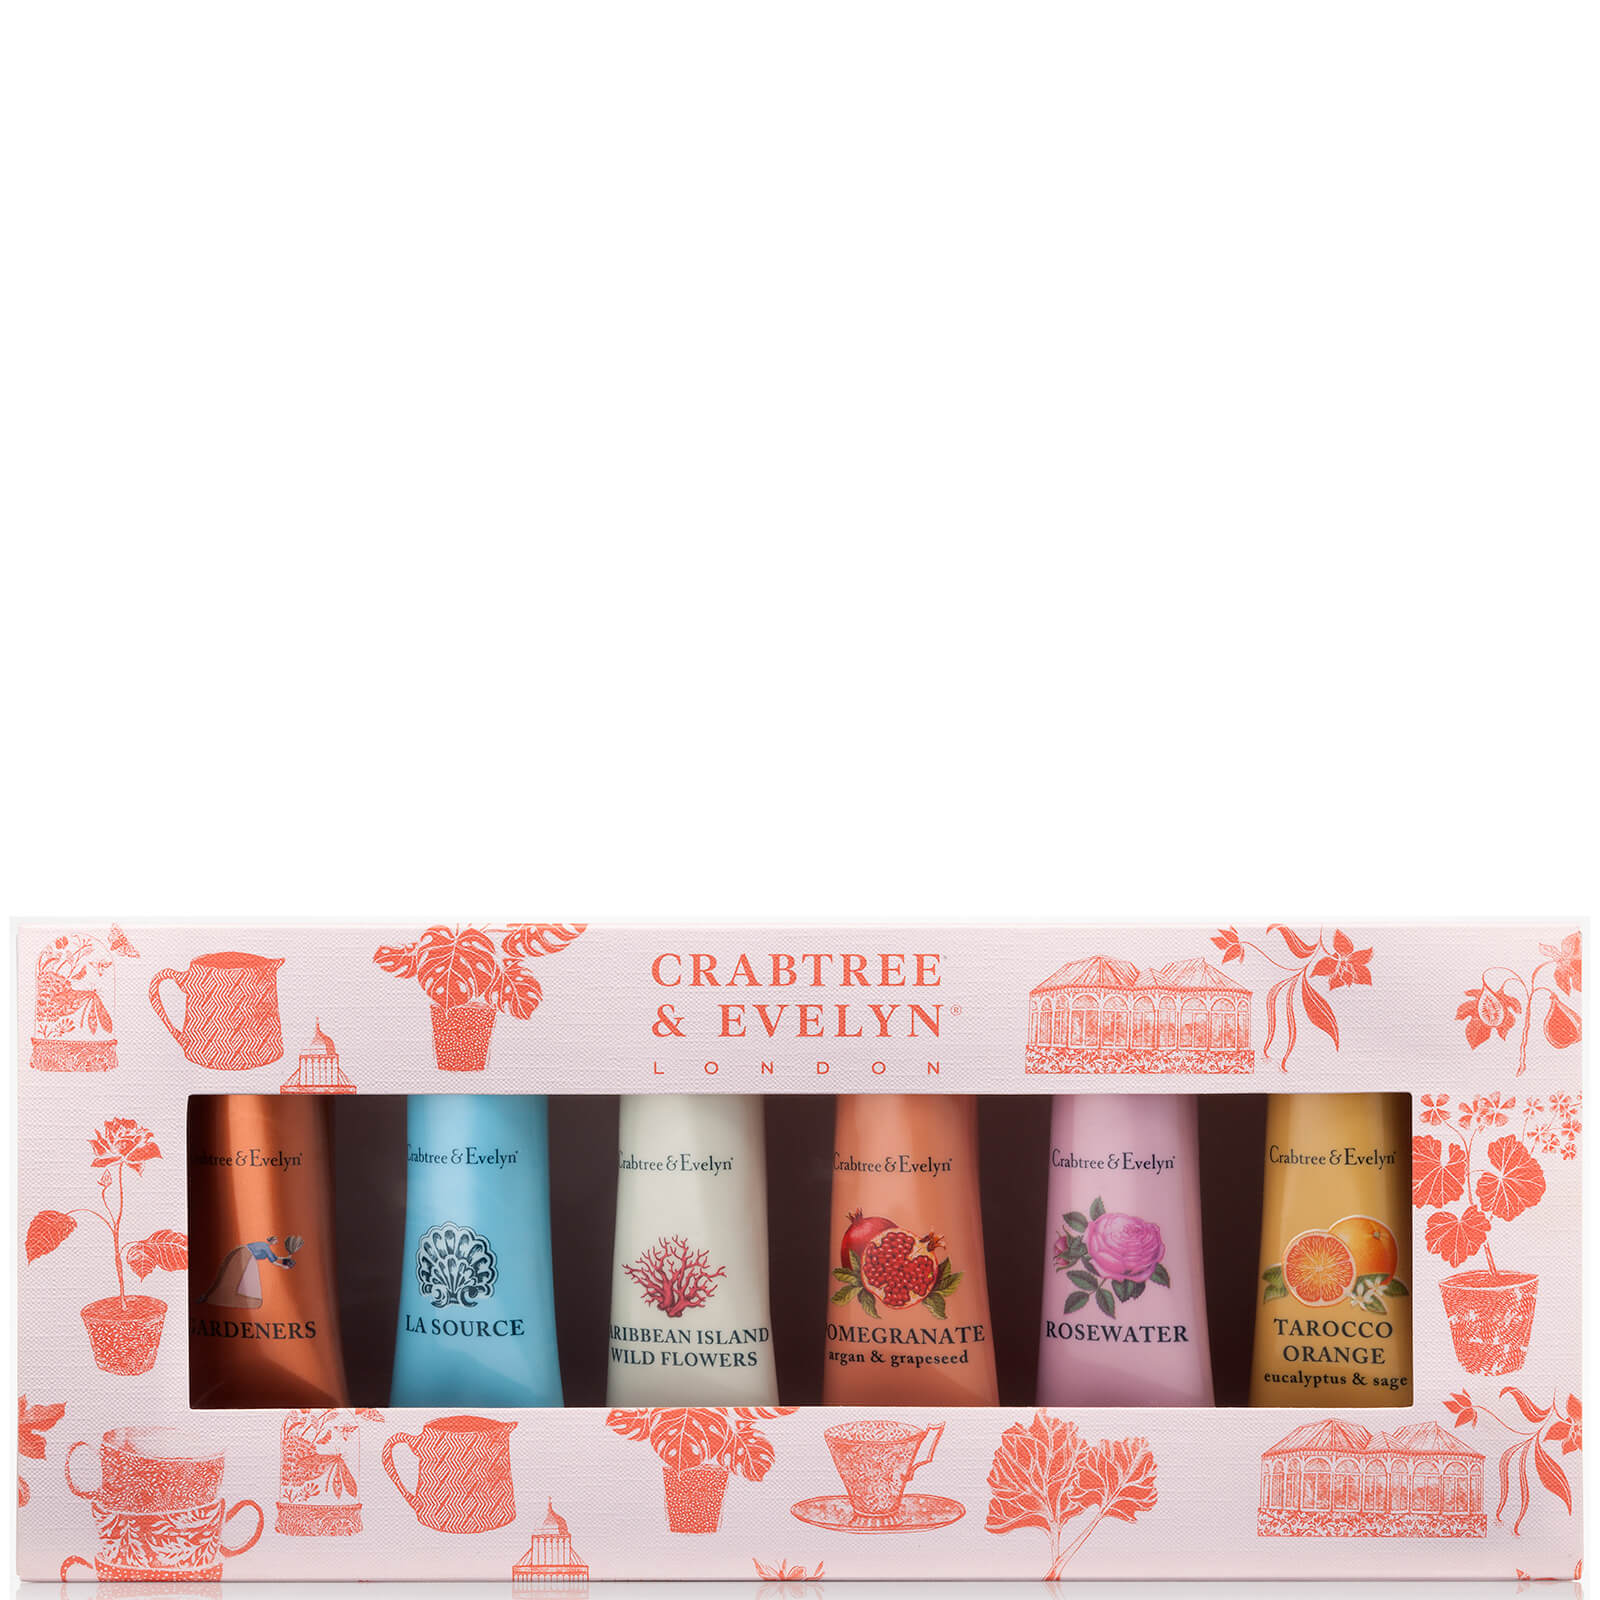 Crabtree & Evelyn Bestsellers Hand Therapy Sample 6 x 25g